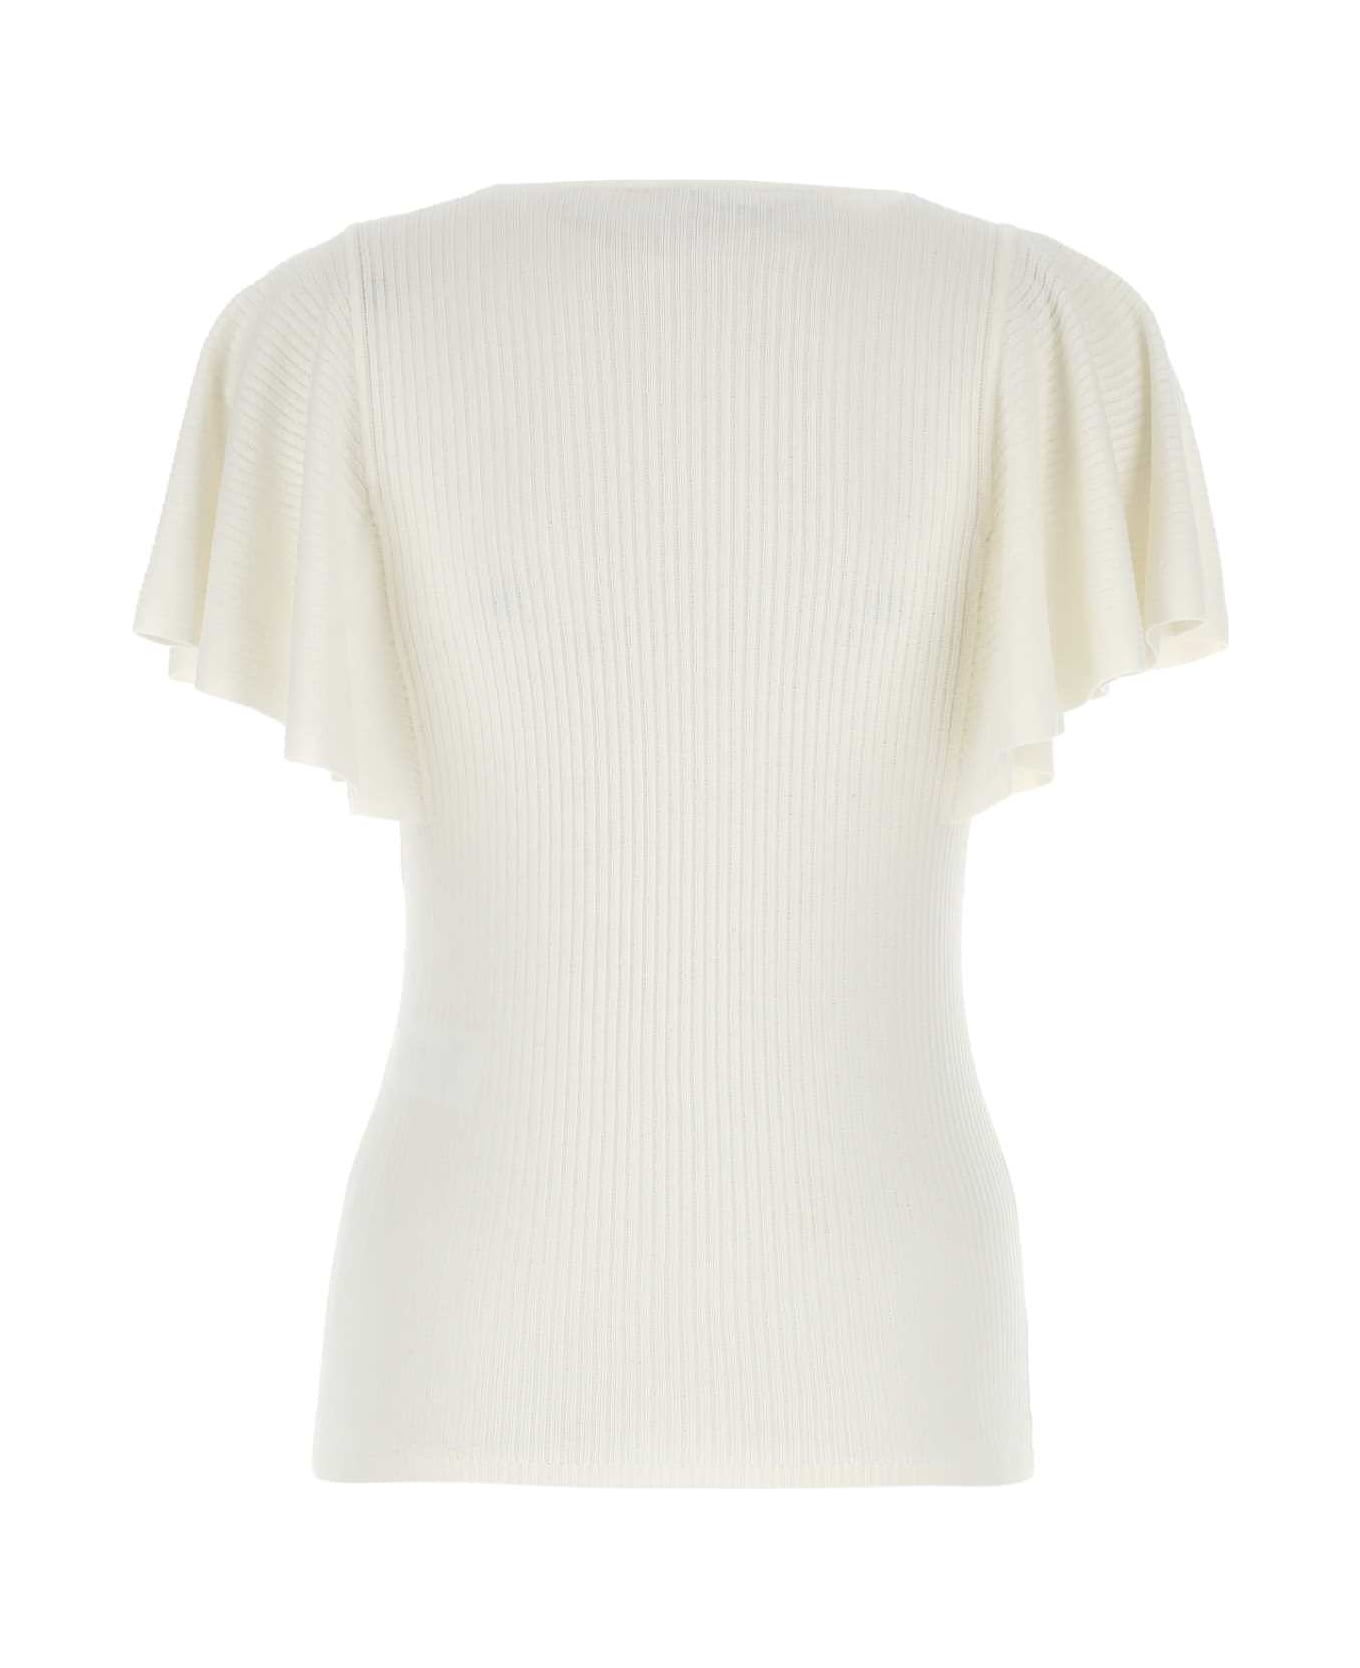 Chloé Ivory Stretch Wool Blend Top - ICONICMILK